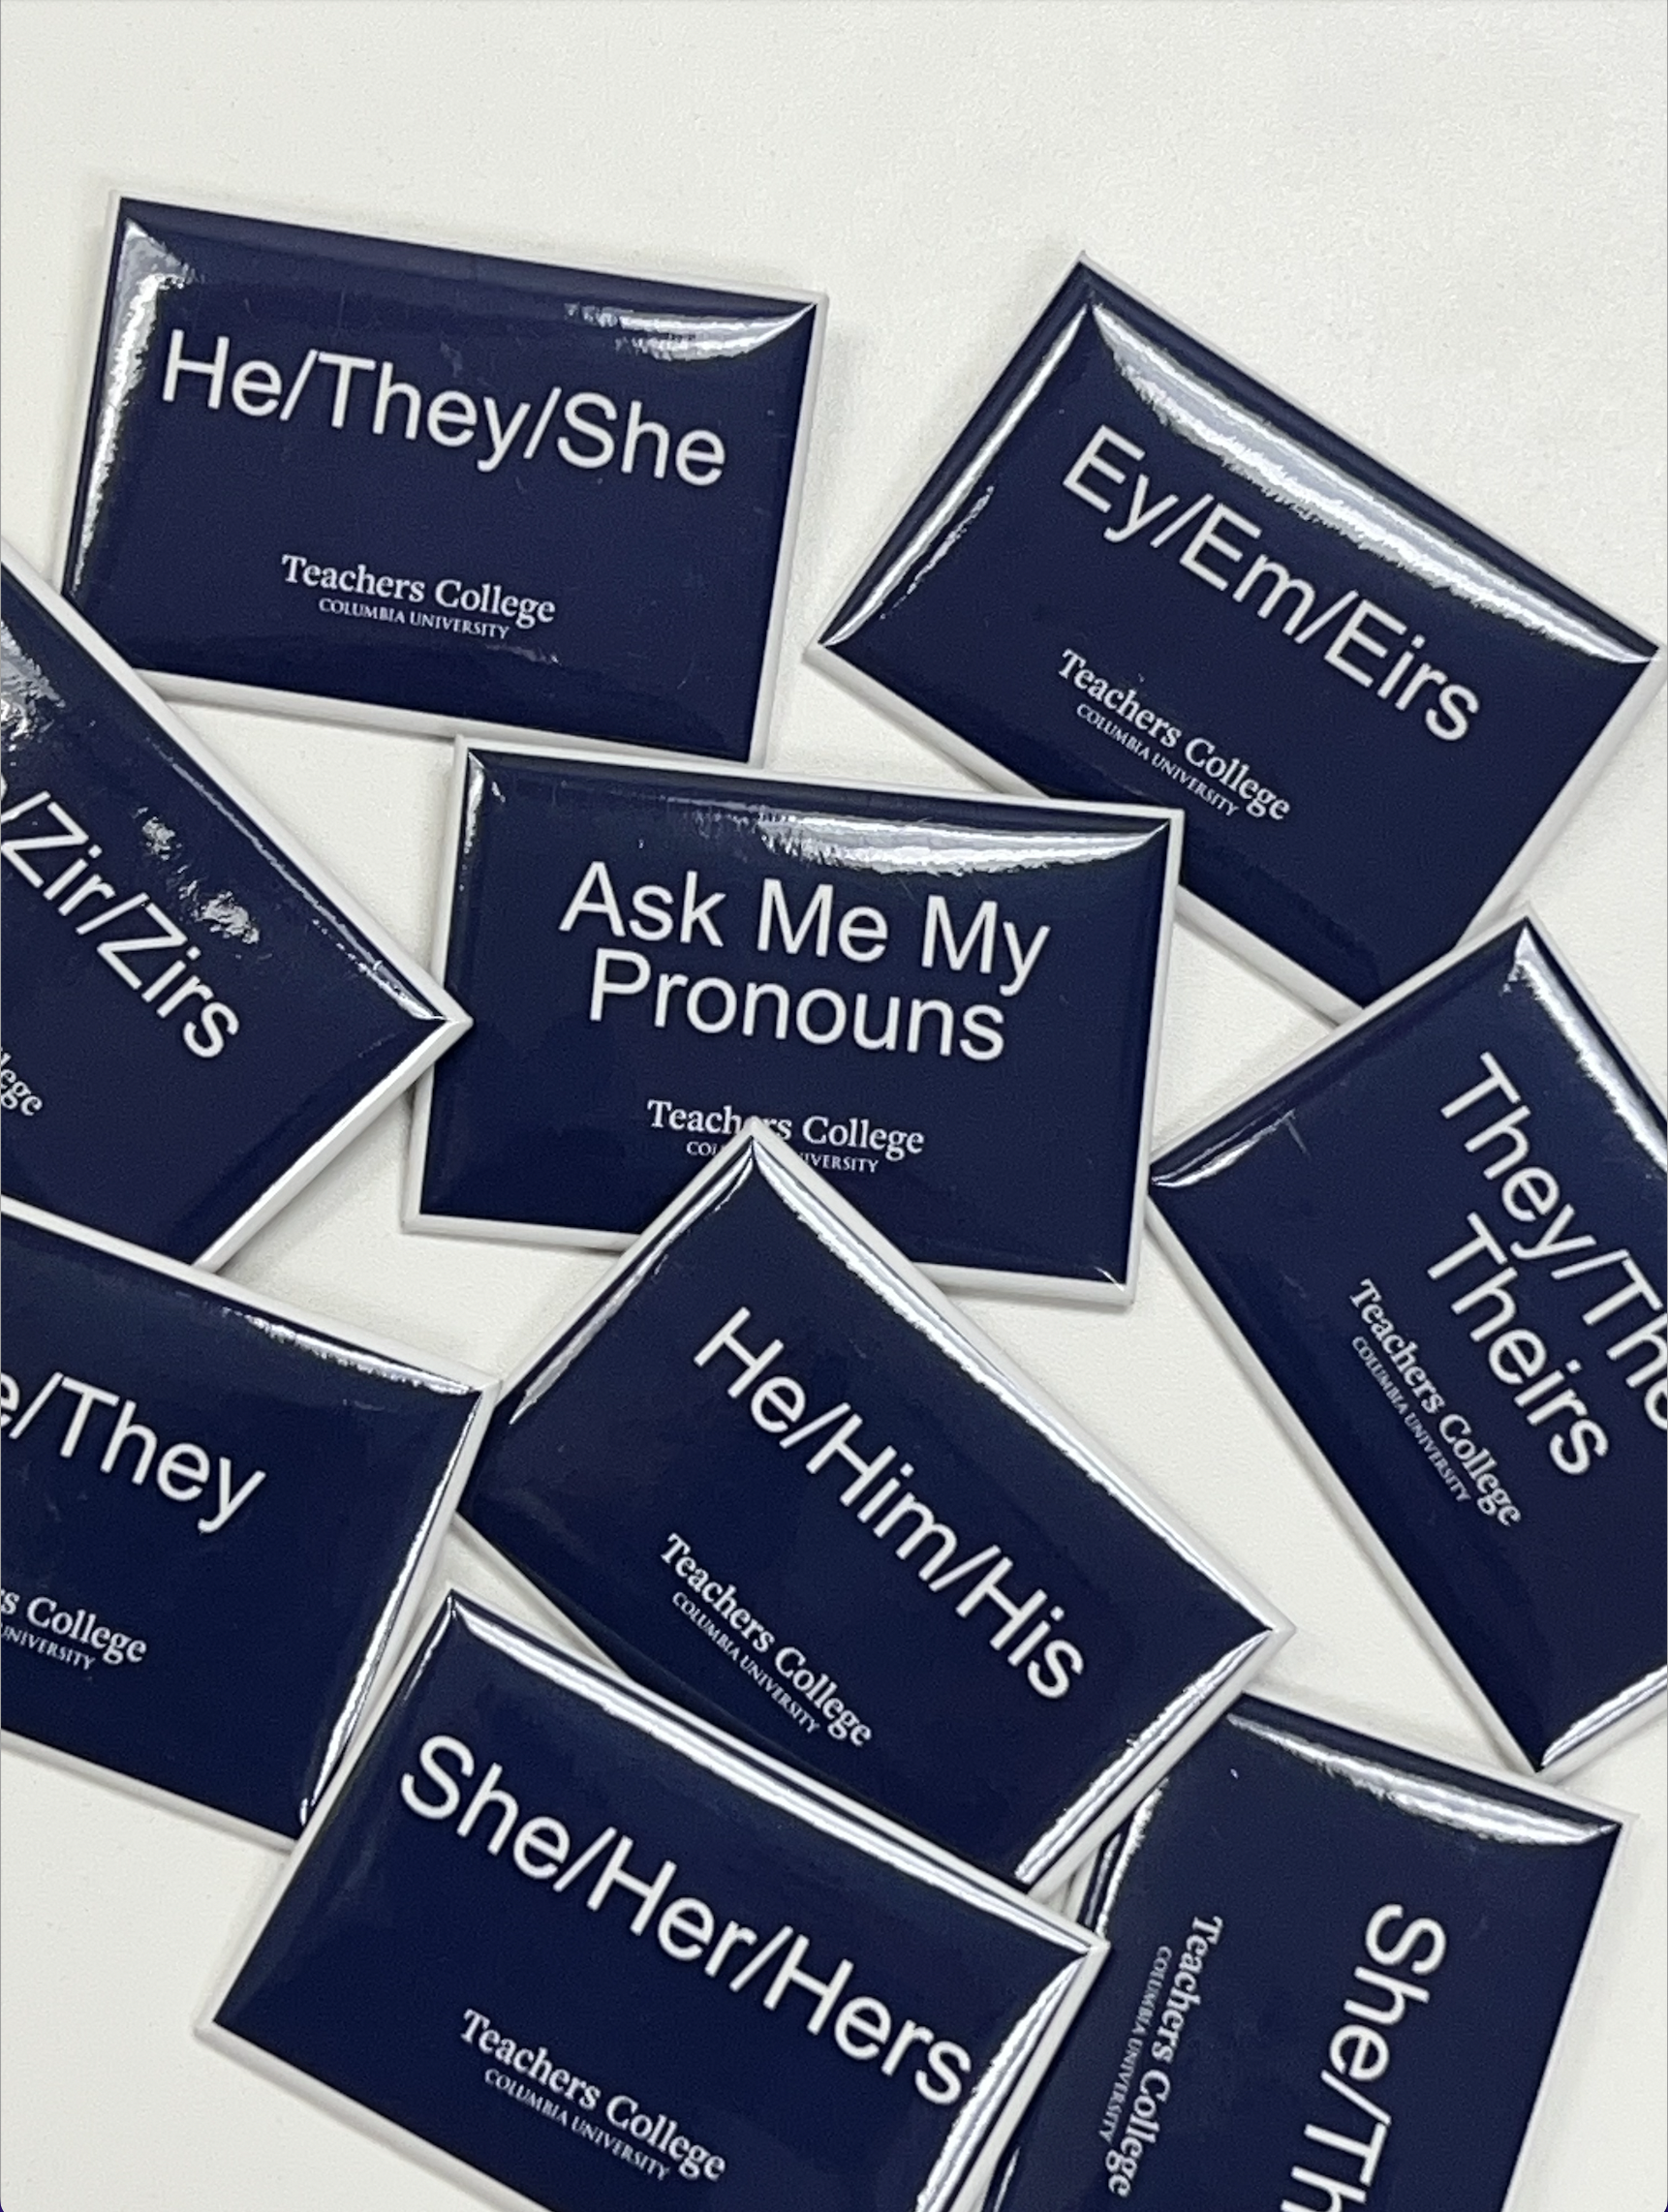 Image of various buttons correlating to students' pronouns (such as she/her/hers, they/them/theirs, ze/zir/zirs)